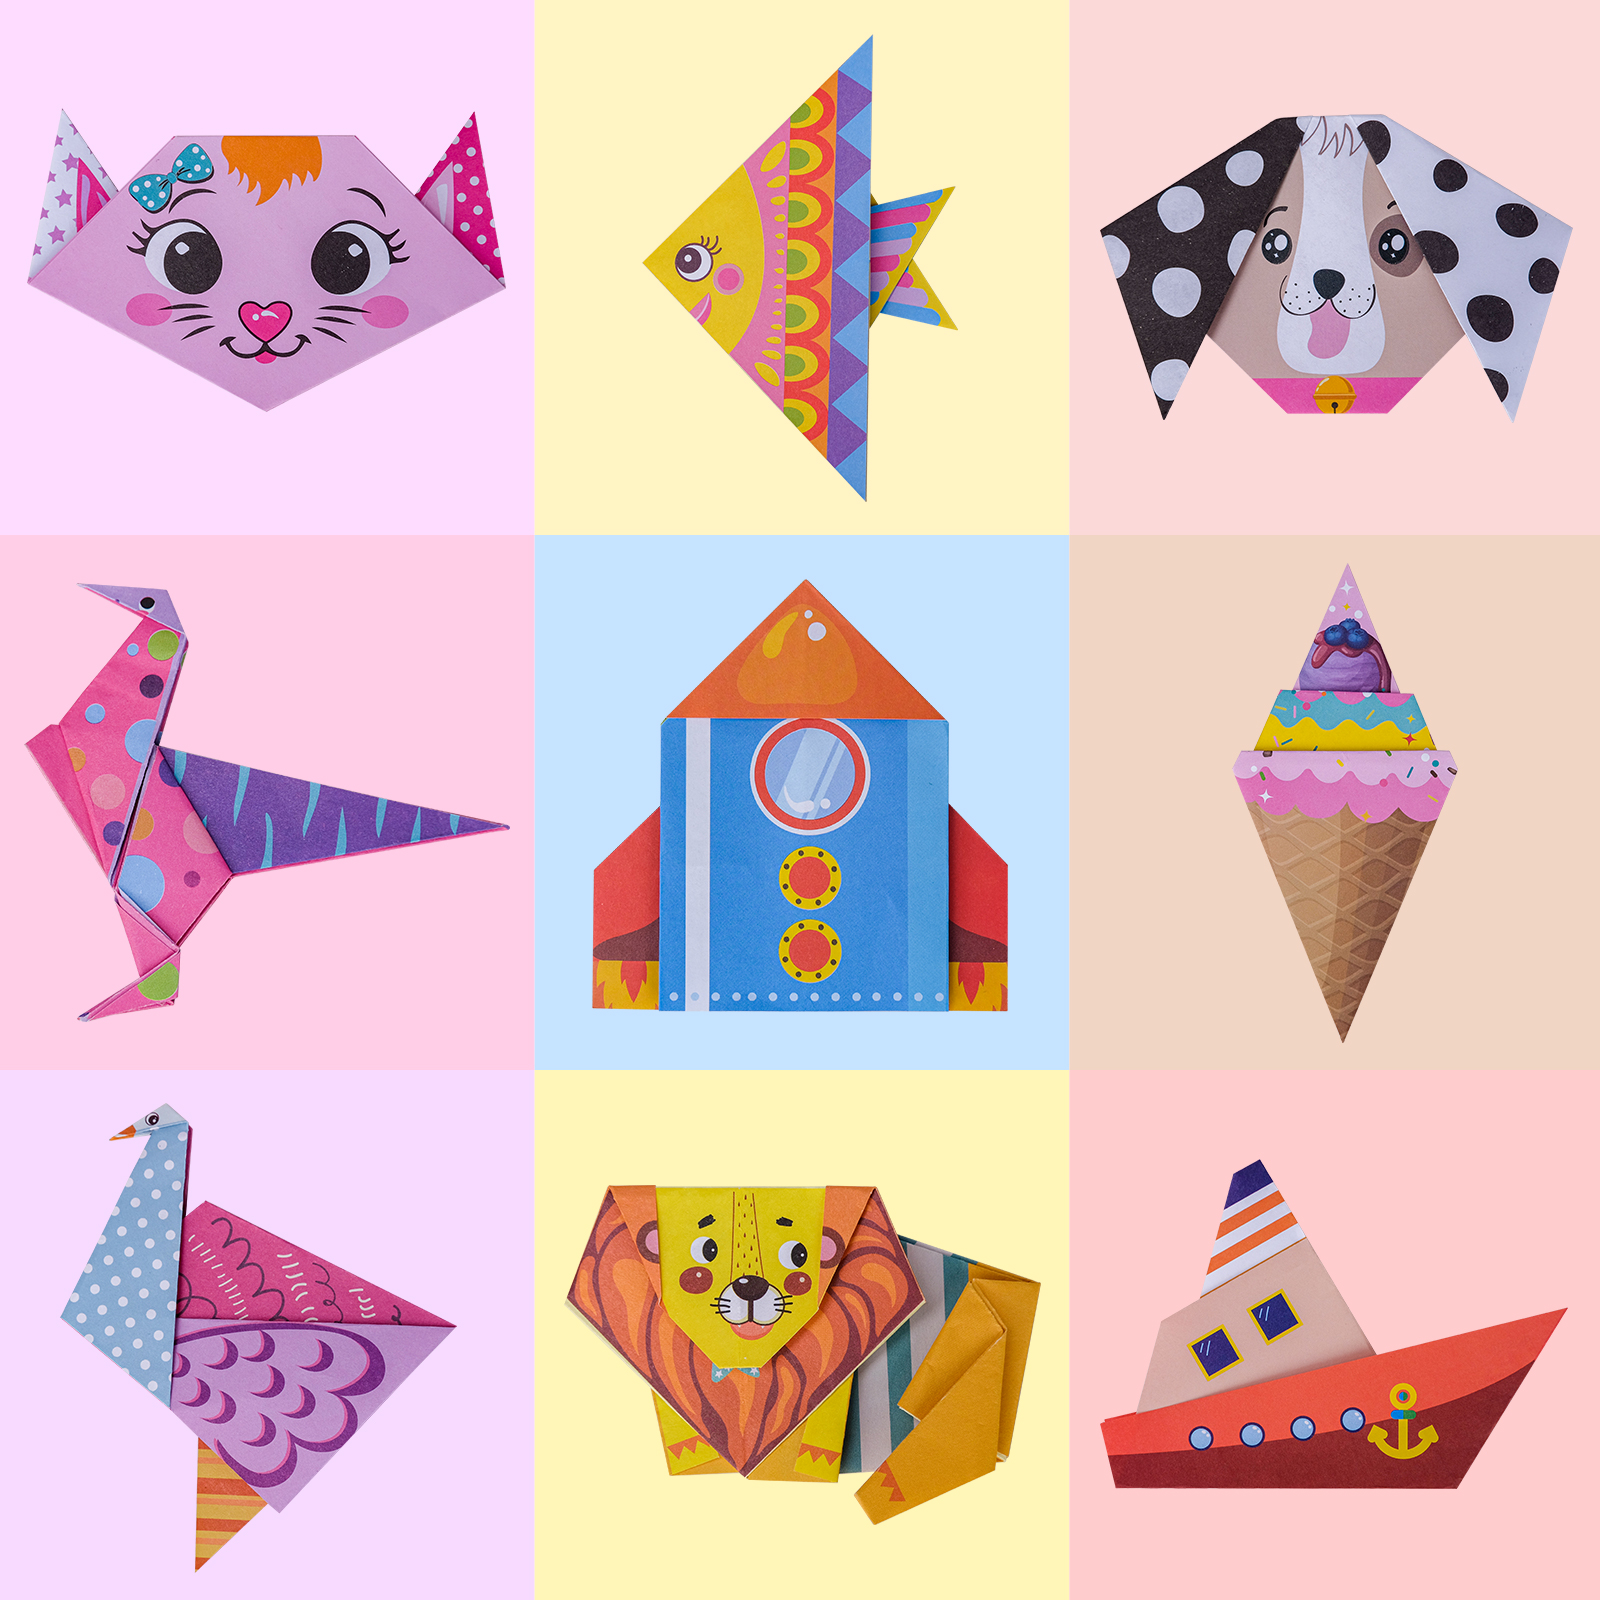 SUNNYPIG 7 8 9 10 11 12 Year Old Girl Boy Gifts Origami Craft Kits for Kids Age 6-12, Arts and Crafts for Kids Teenage Gifts, Origami Paper Presents for 8 9 10 11 12 Year Old Girls Boys Beginner - image 5 of 7